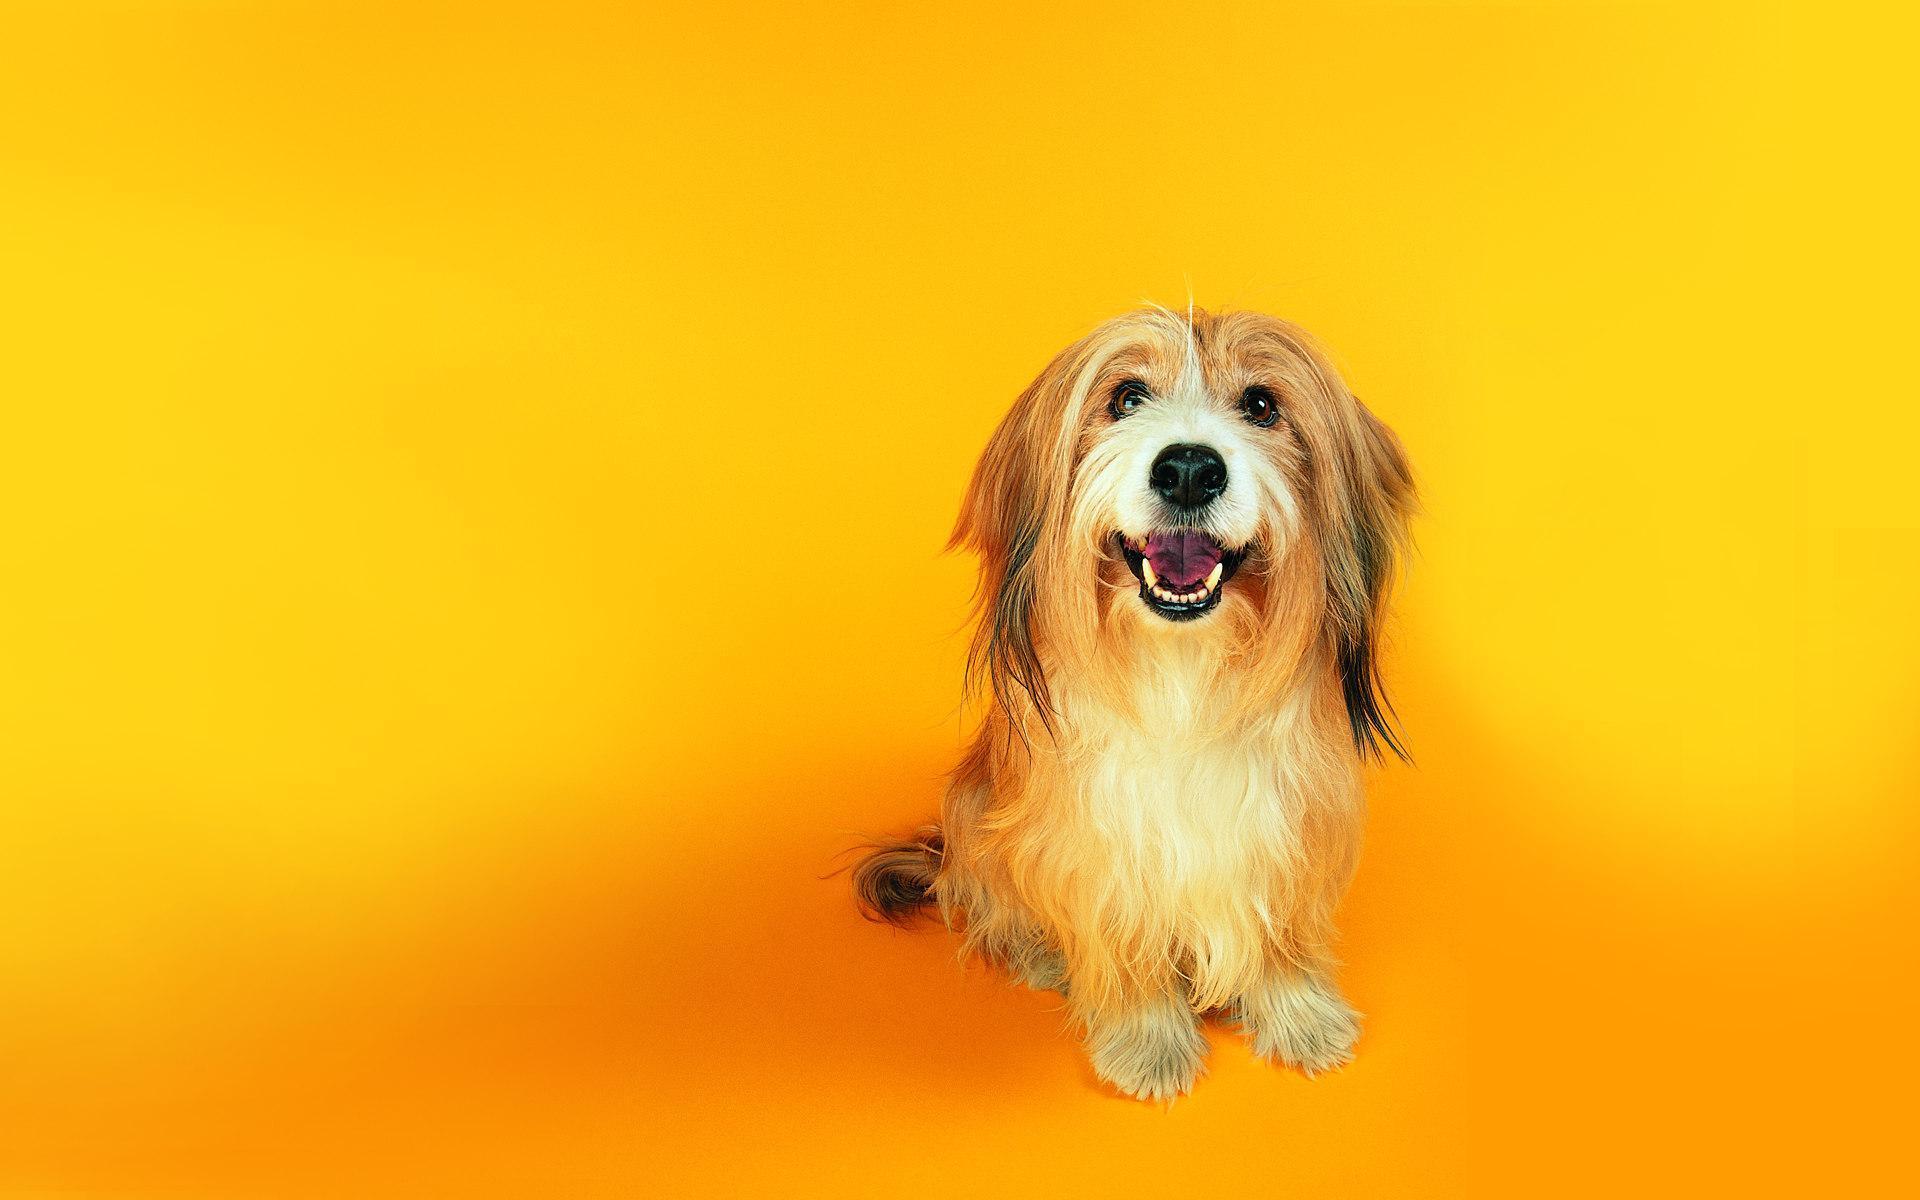 Fun Dog Wallpaper With Yellow Background, HD Wallpaper